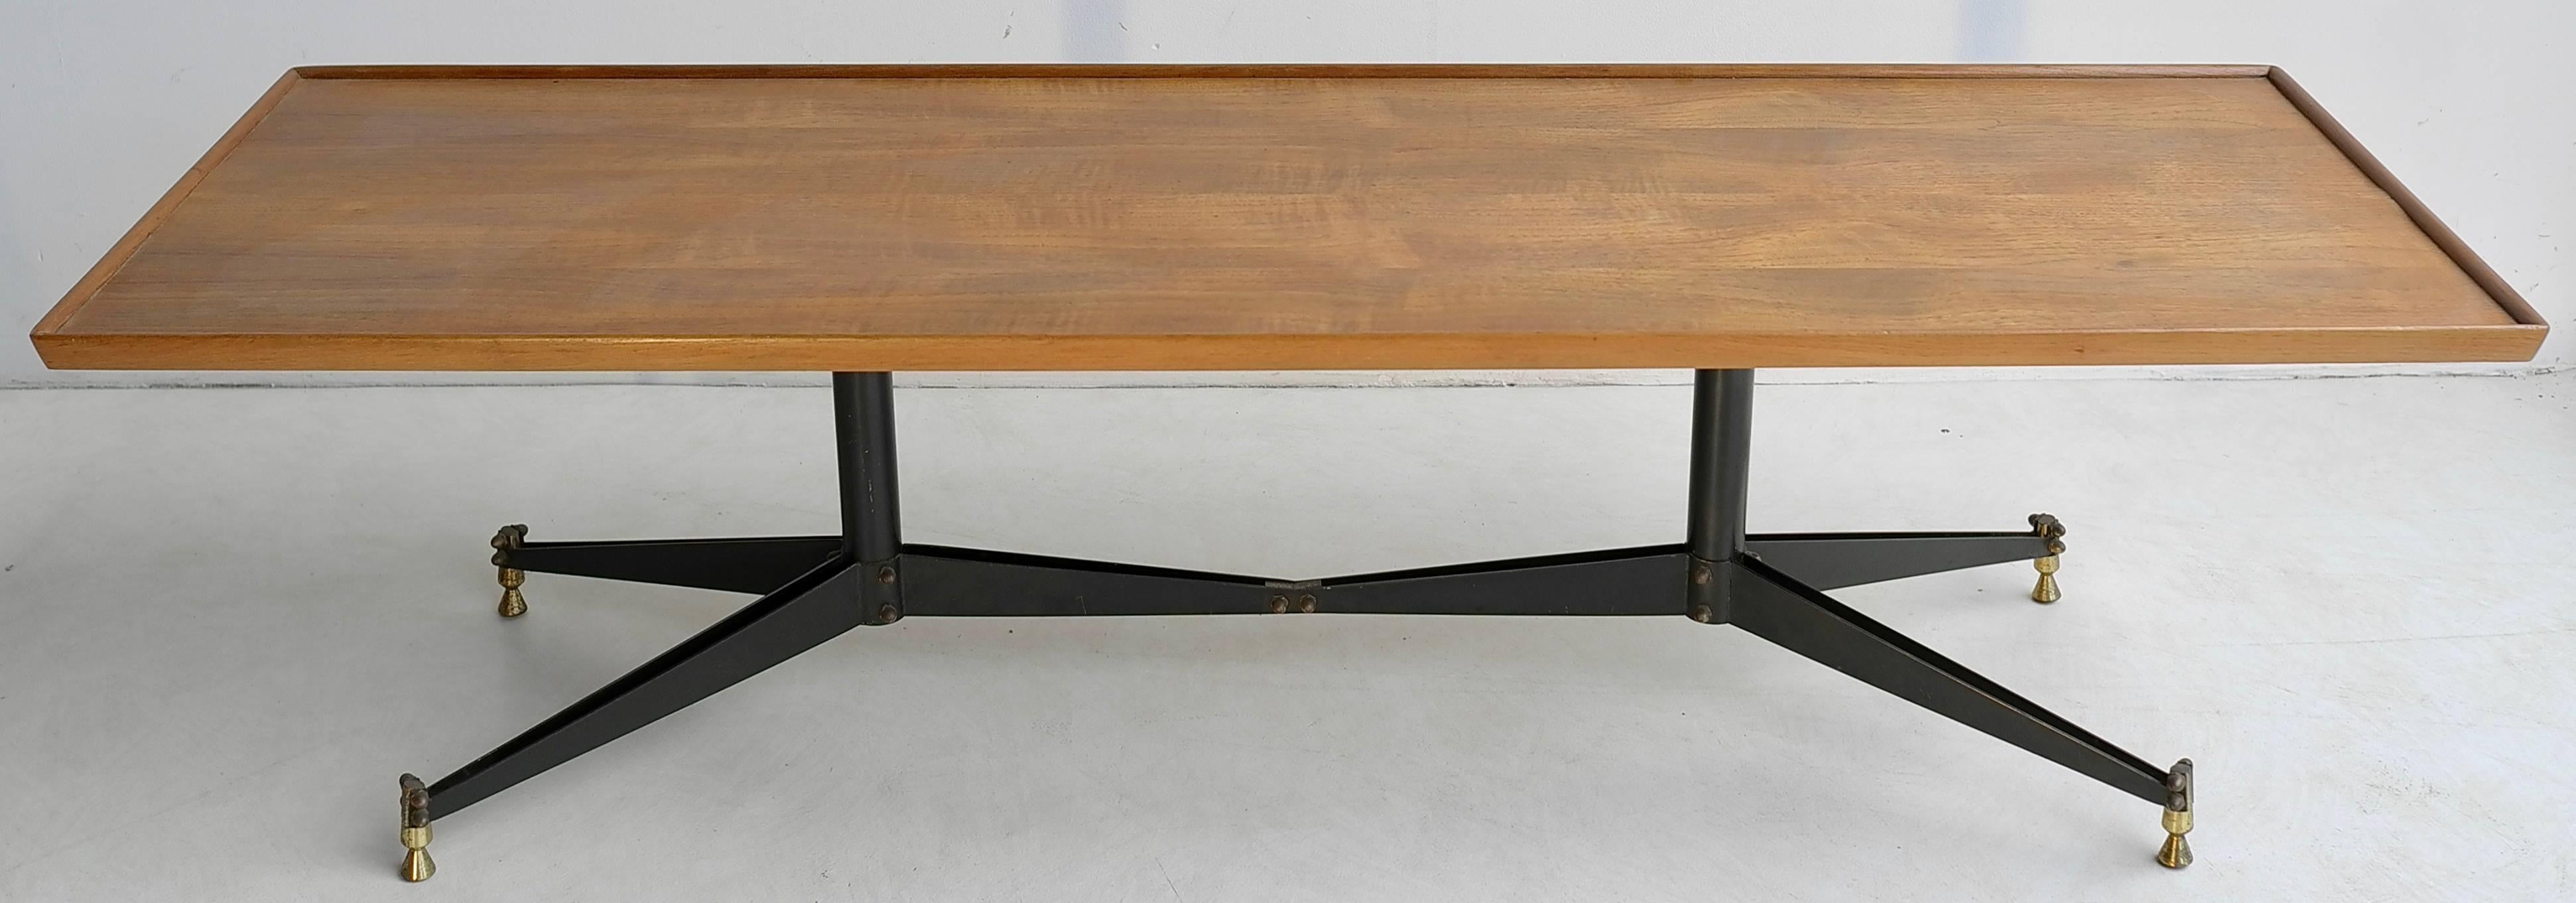 Coffee table with wooden top and metal and brass base, Italy, 1950s.